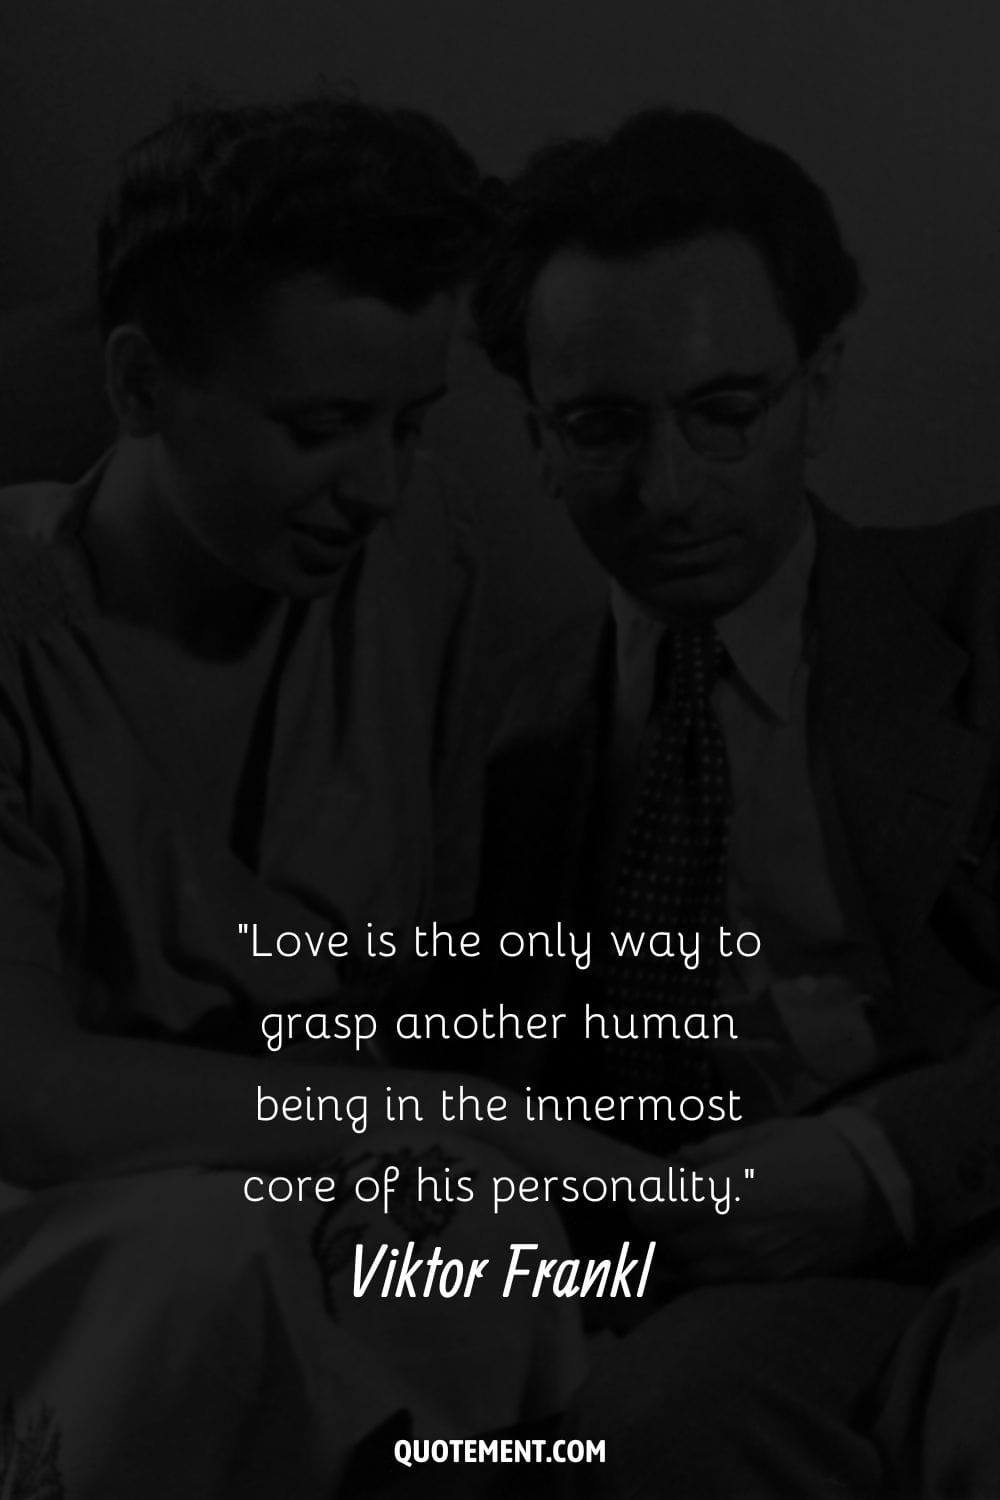 Monochrome image of Viktor Frankl and his wife representing his quote about love.